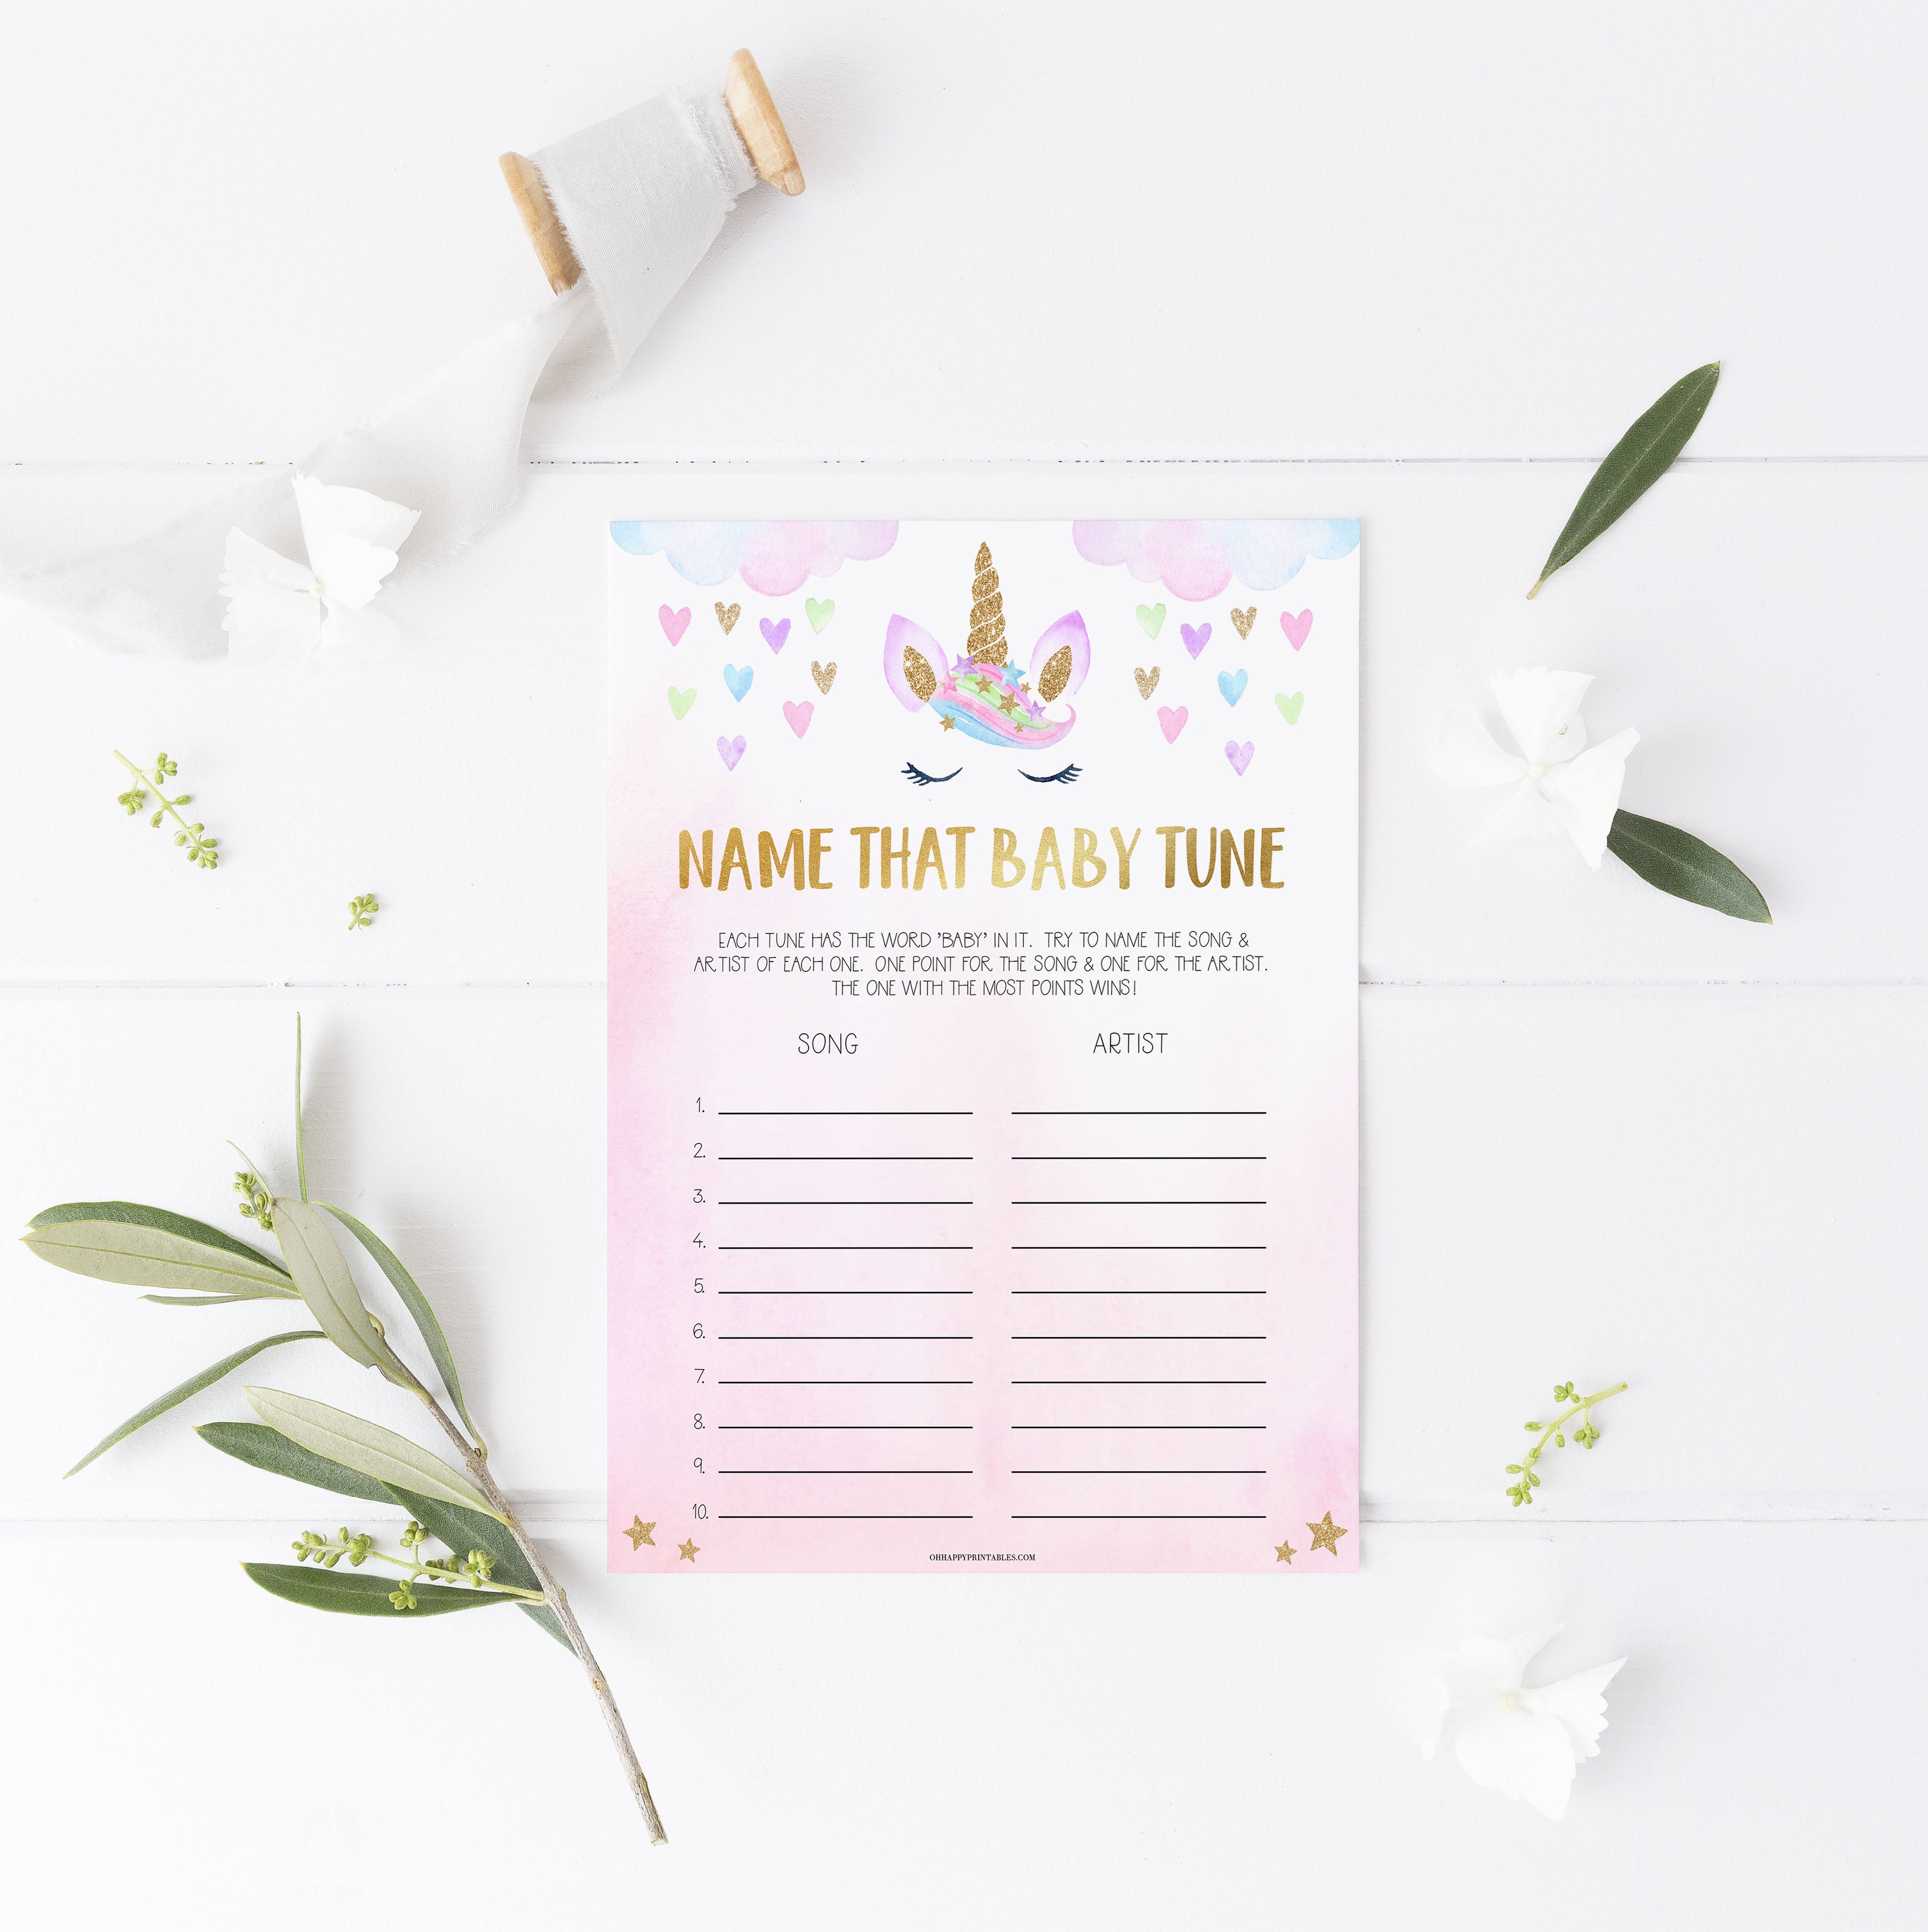 name that baby tune game, Printable baby shower games, unicorn baby games, baby shower games, fun baby shower ideas, top baby shower ideas, unicorn baby shower, baby shower games, fun unicorn baby shower ideas